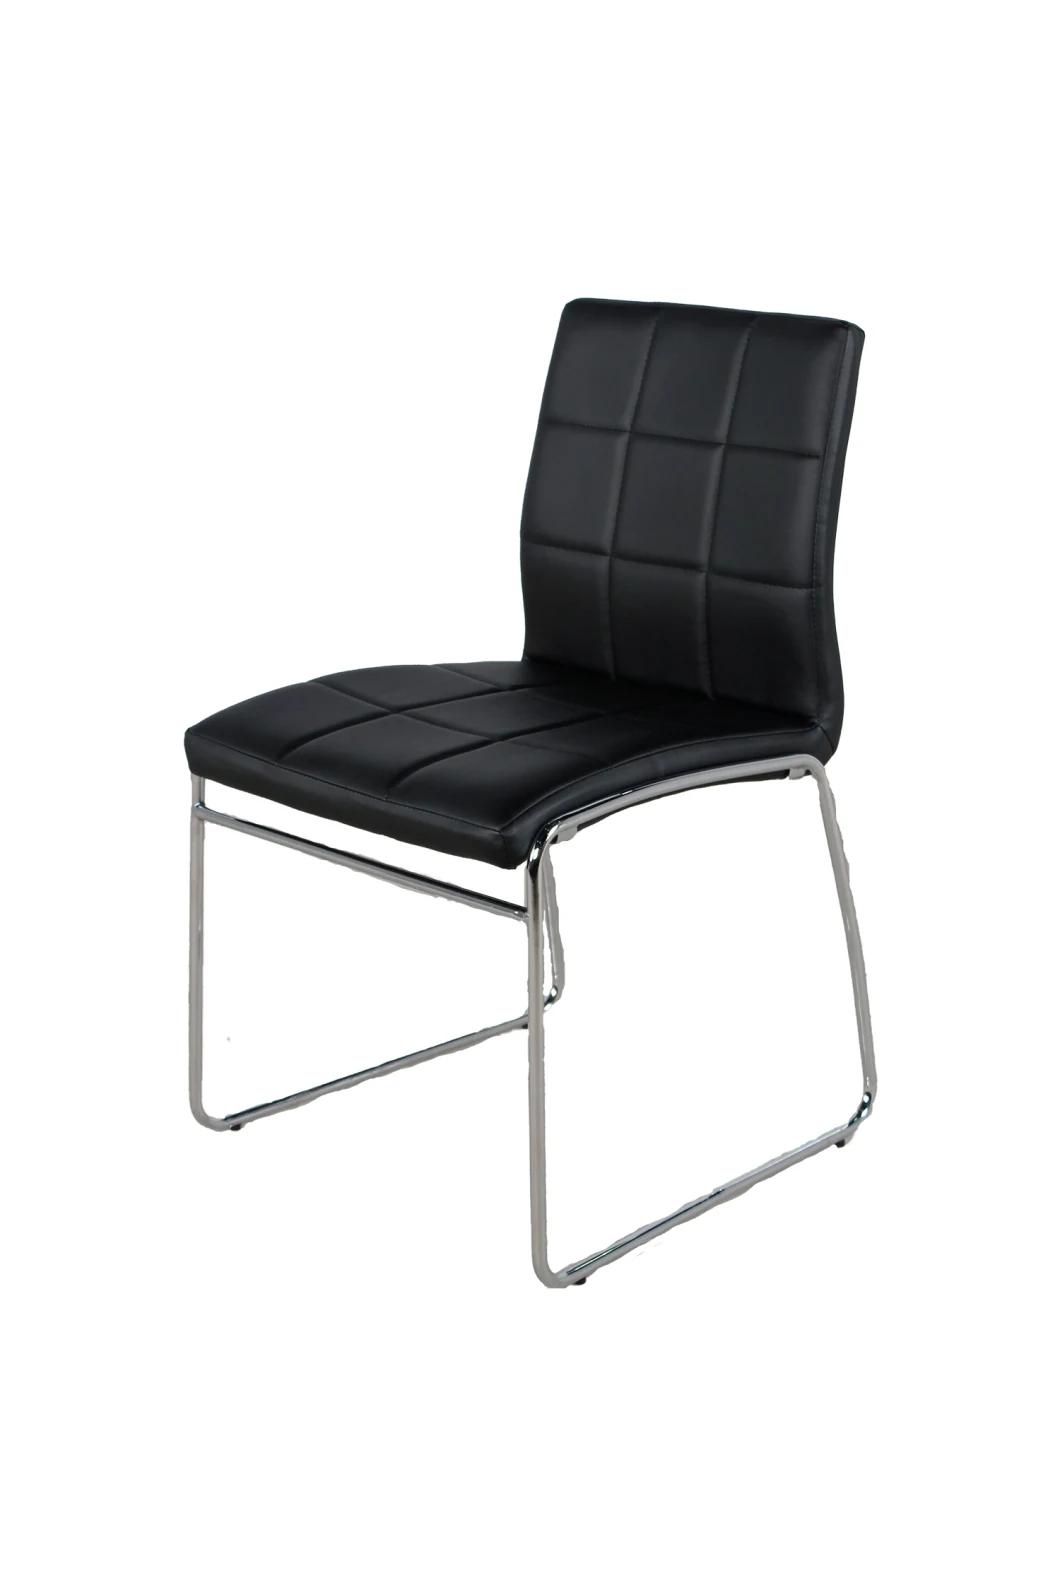 Modern Home Outdoor Restaurant Furniture PU Leather Dining Room Chair with Stainless Legs